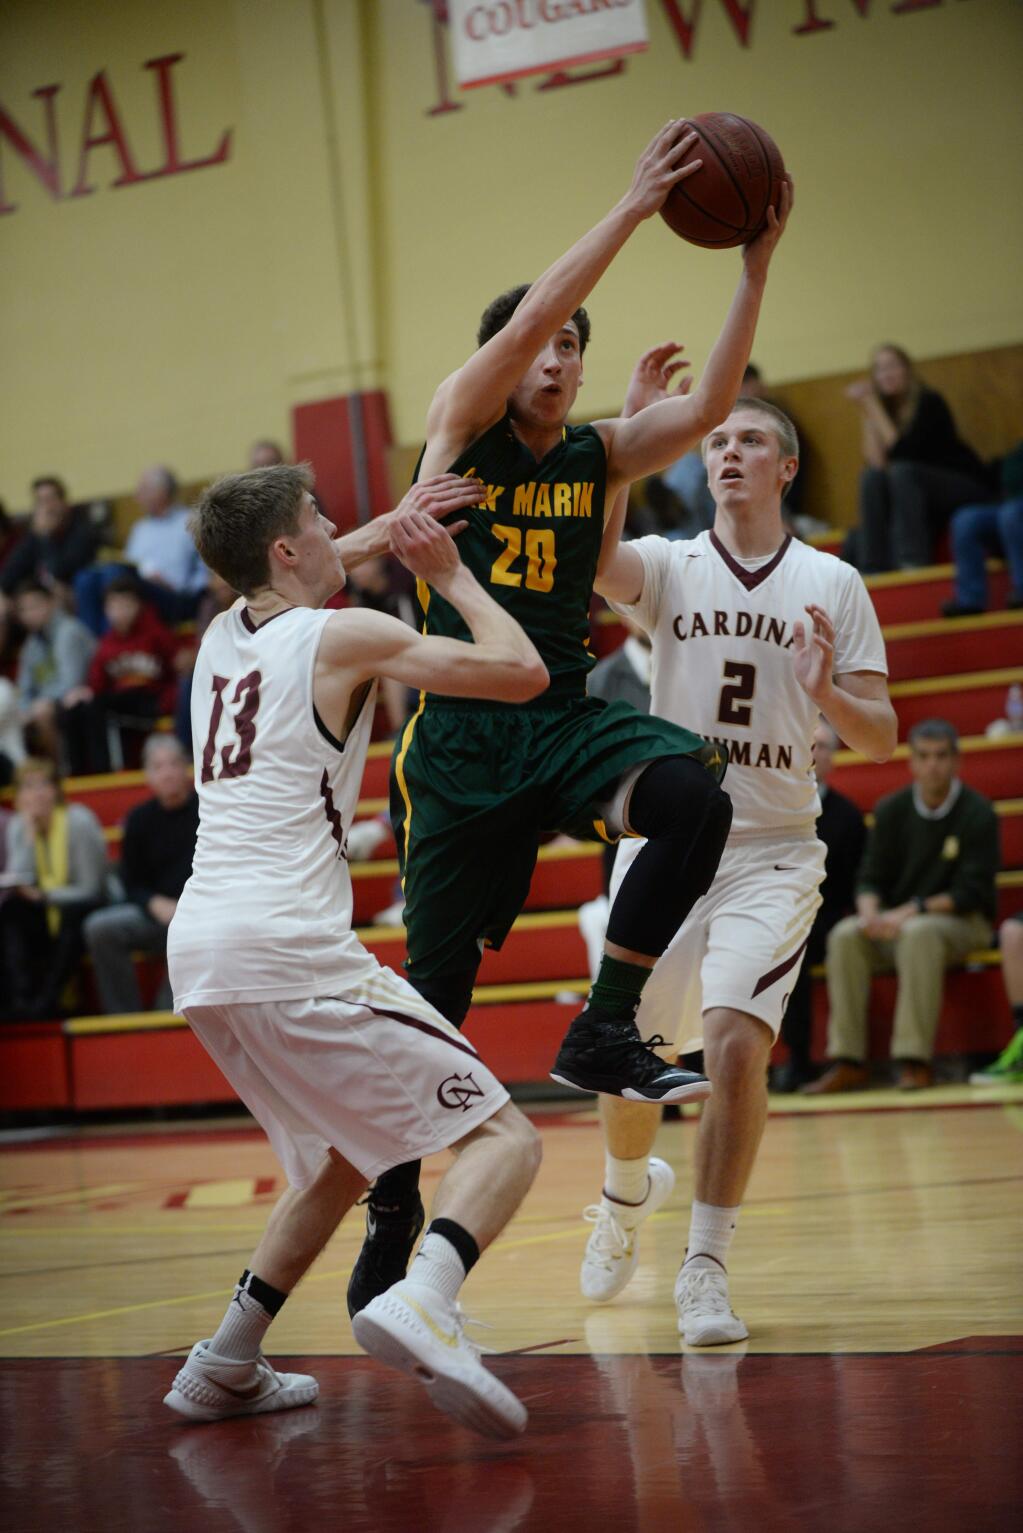 San Marin player Tommy Sanz (#20) cutting between Cardinal Newman's Seth Doolittle (#13) and Cody Baker (#2) during the the second half of the Rose City tournament final held at Cardinal Newman in Santa Rosa Saturday evening. San Marin won 51 to 32. December 12, 2015. (Photo: Erik Castro/for The Press Democrat)